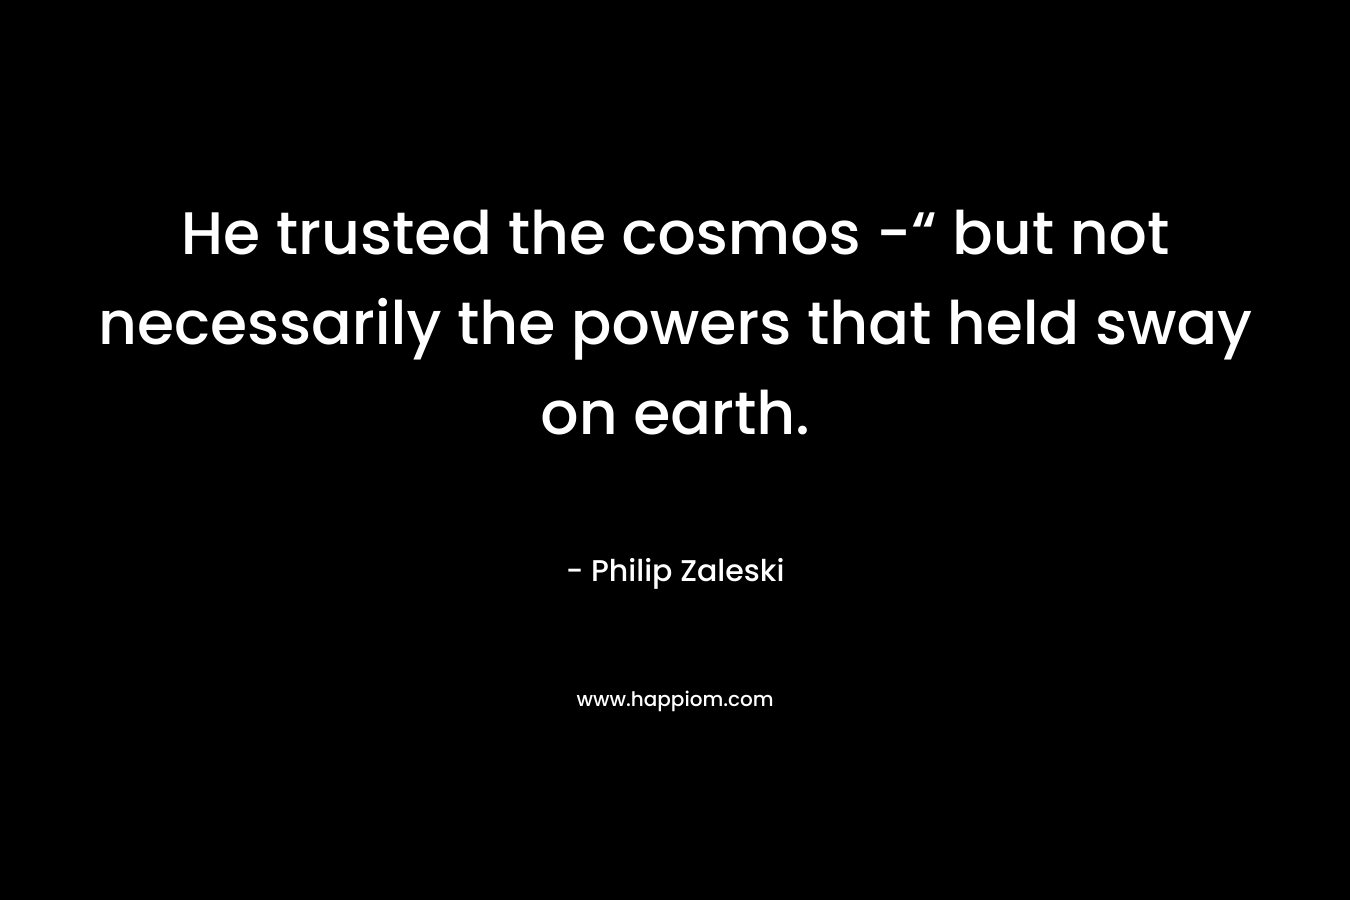 He trusted the cosmos -“ but not necessarily the powers that held sway on earth. – Philip Zaleski